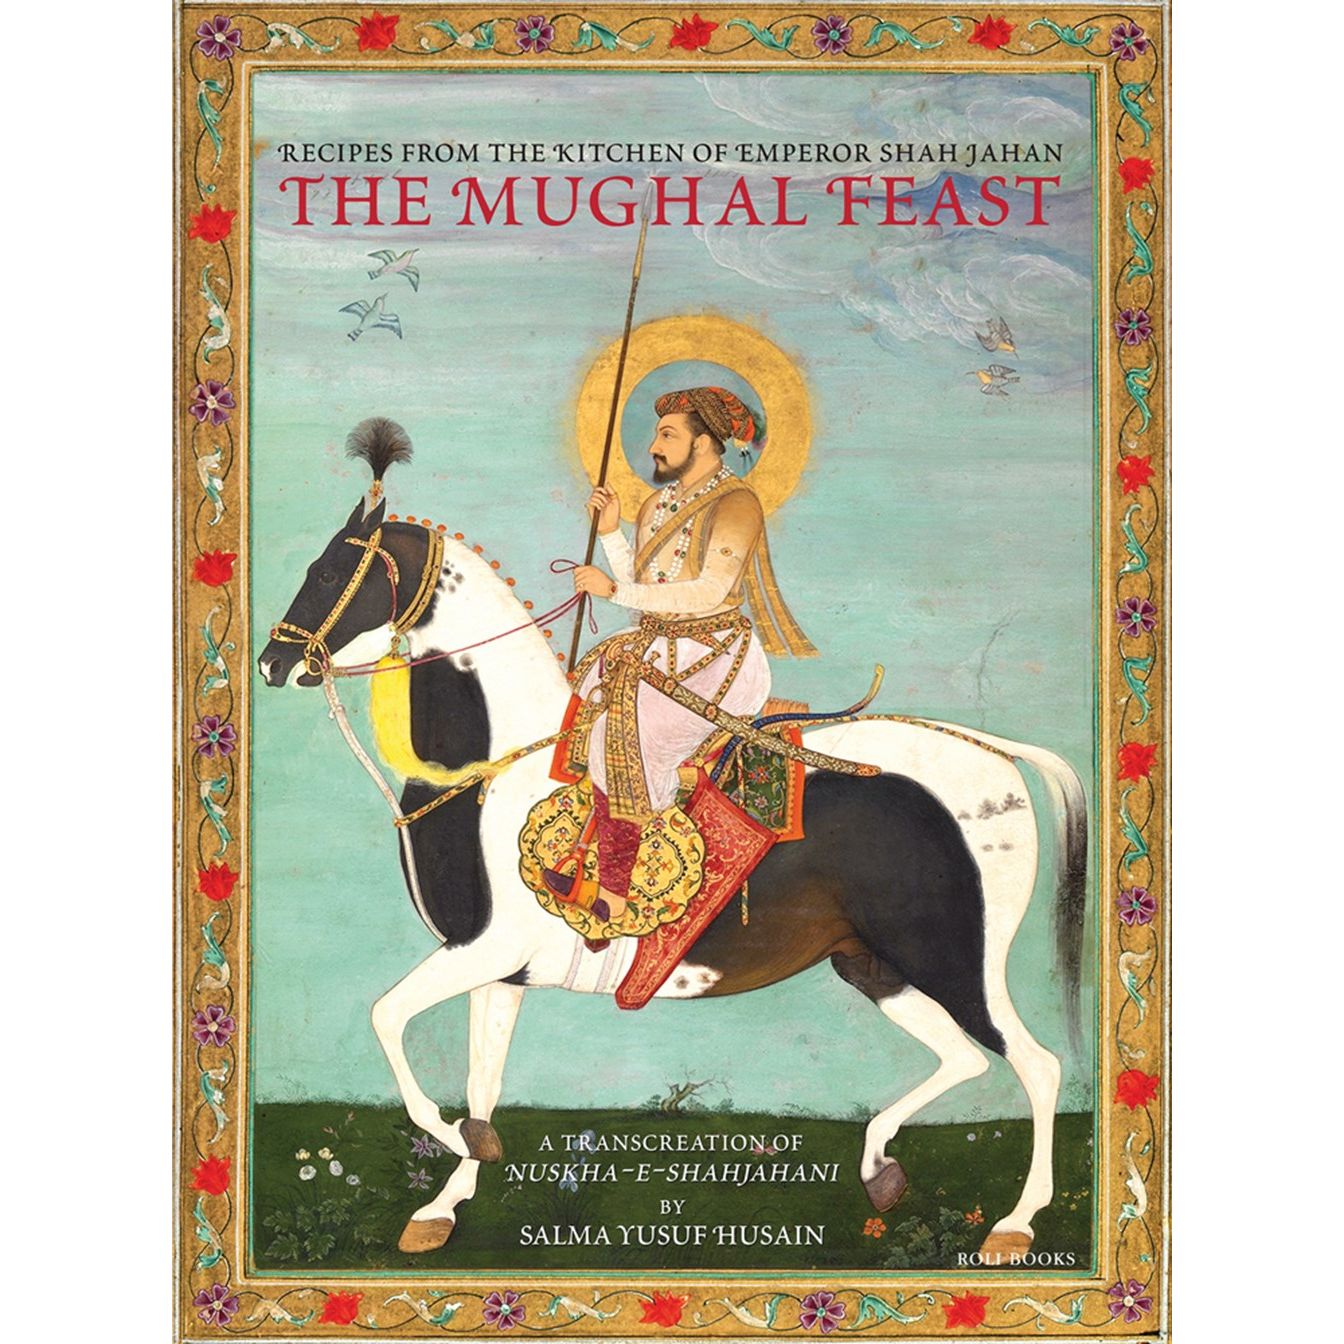 The Mughal Feast: Recipe from the Kitchen of Emperor Shah Jahan (Salma Yusuf Husain)